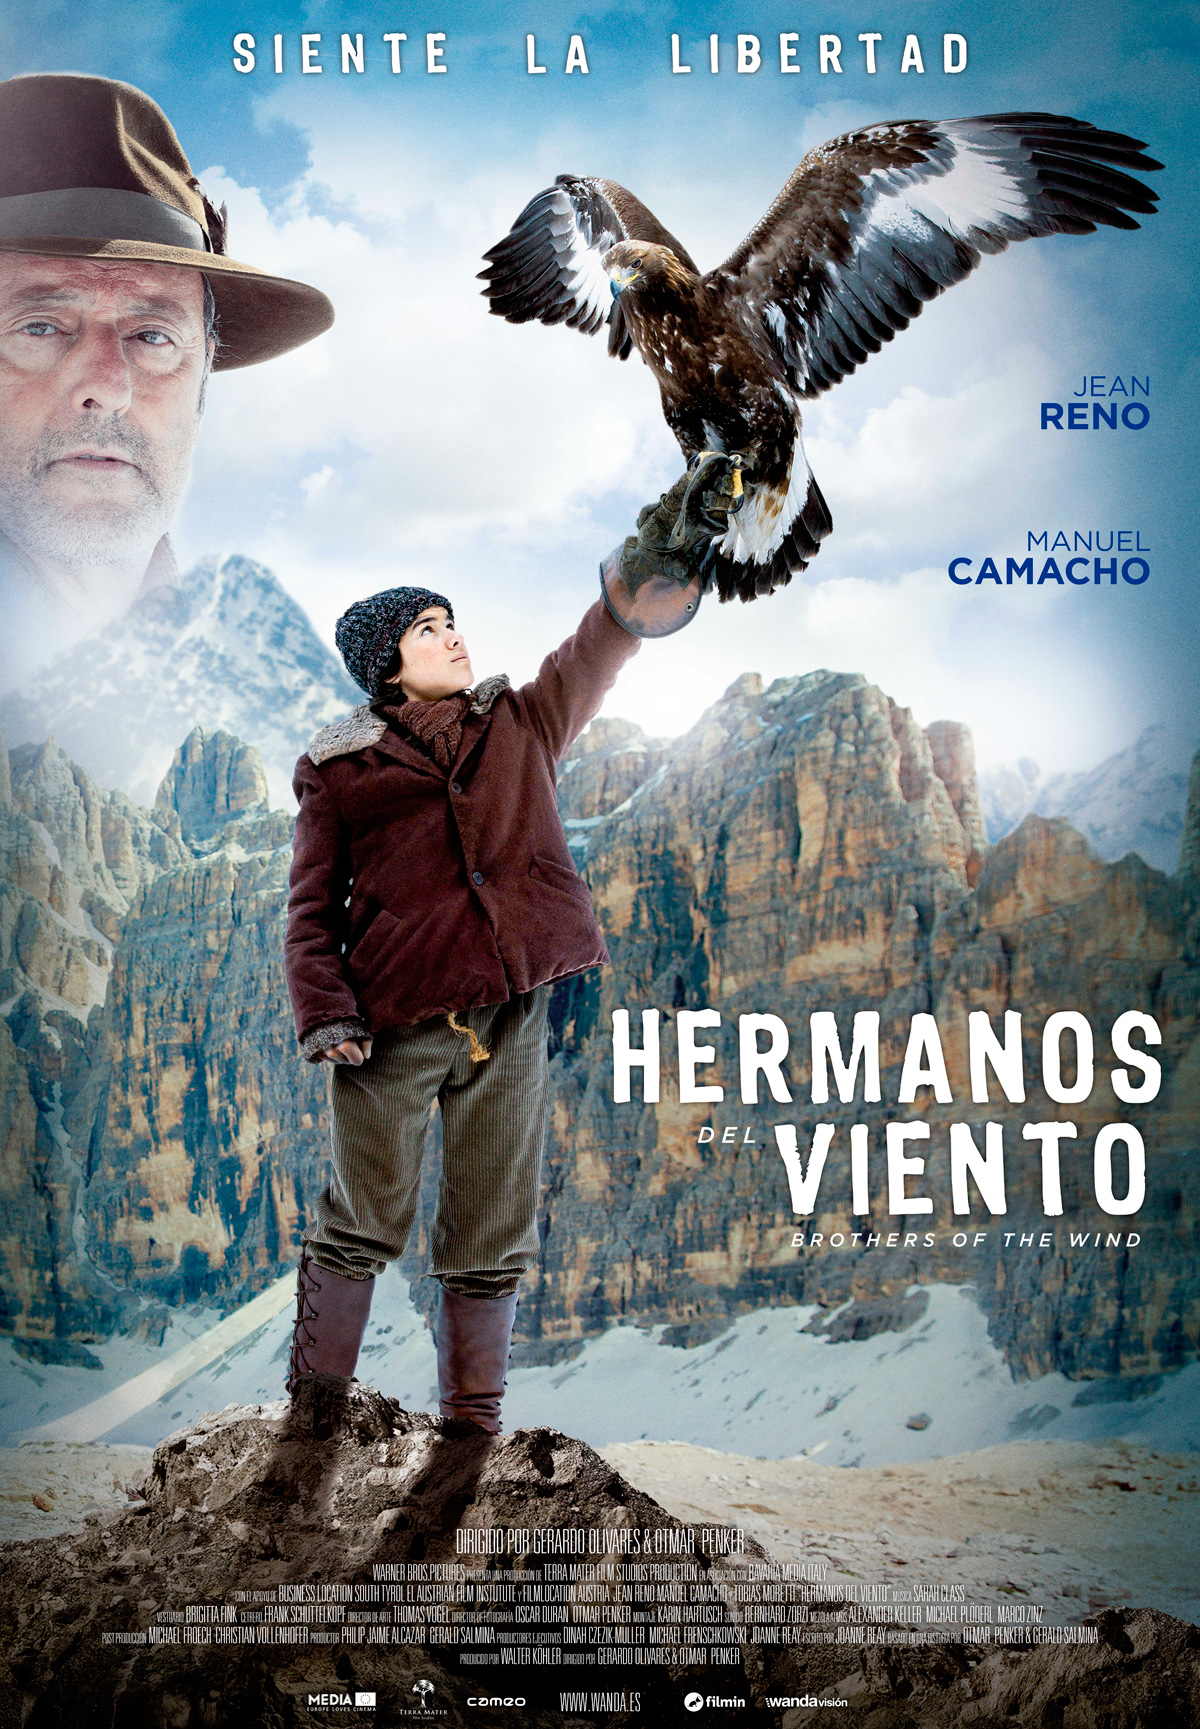 https://vepeliculas.tv/watch/brothers-of-the-wind-00ob8wf-t7h.html